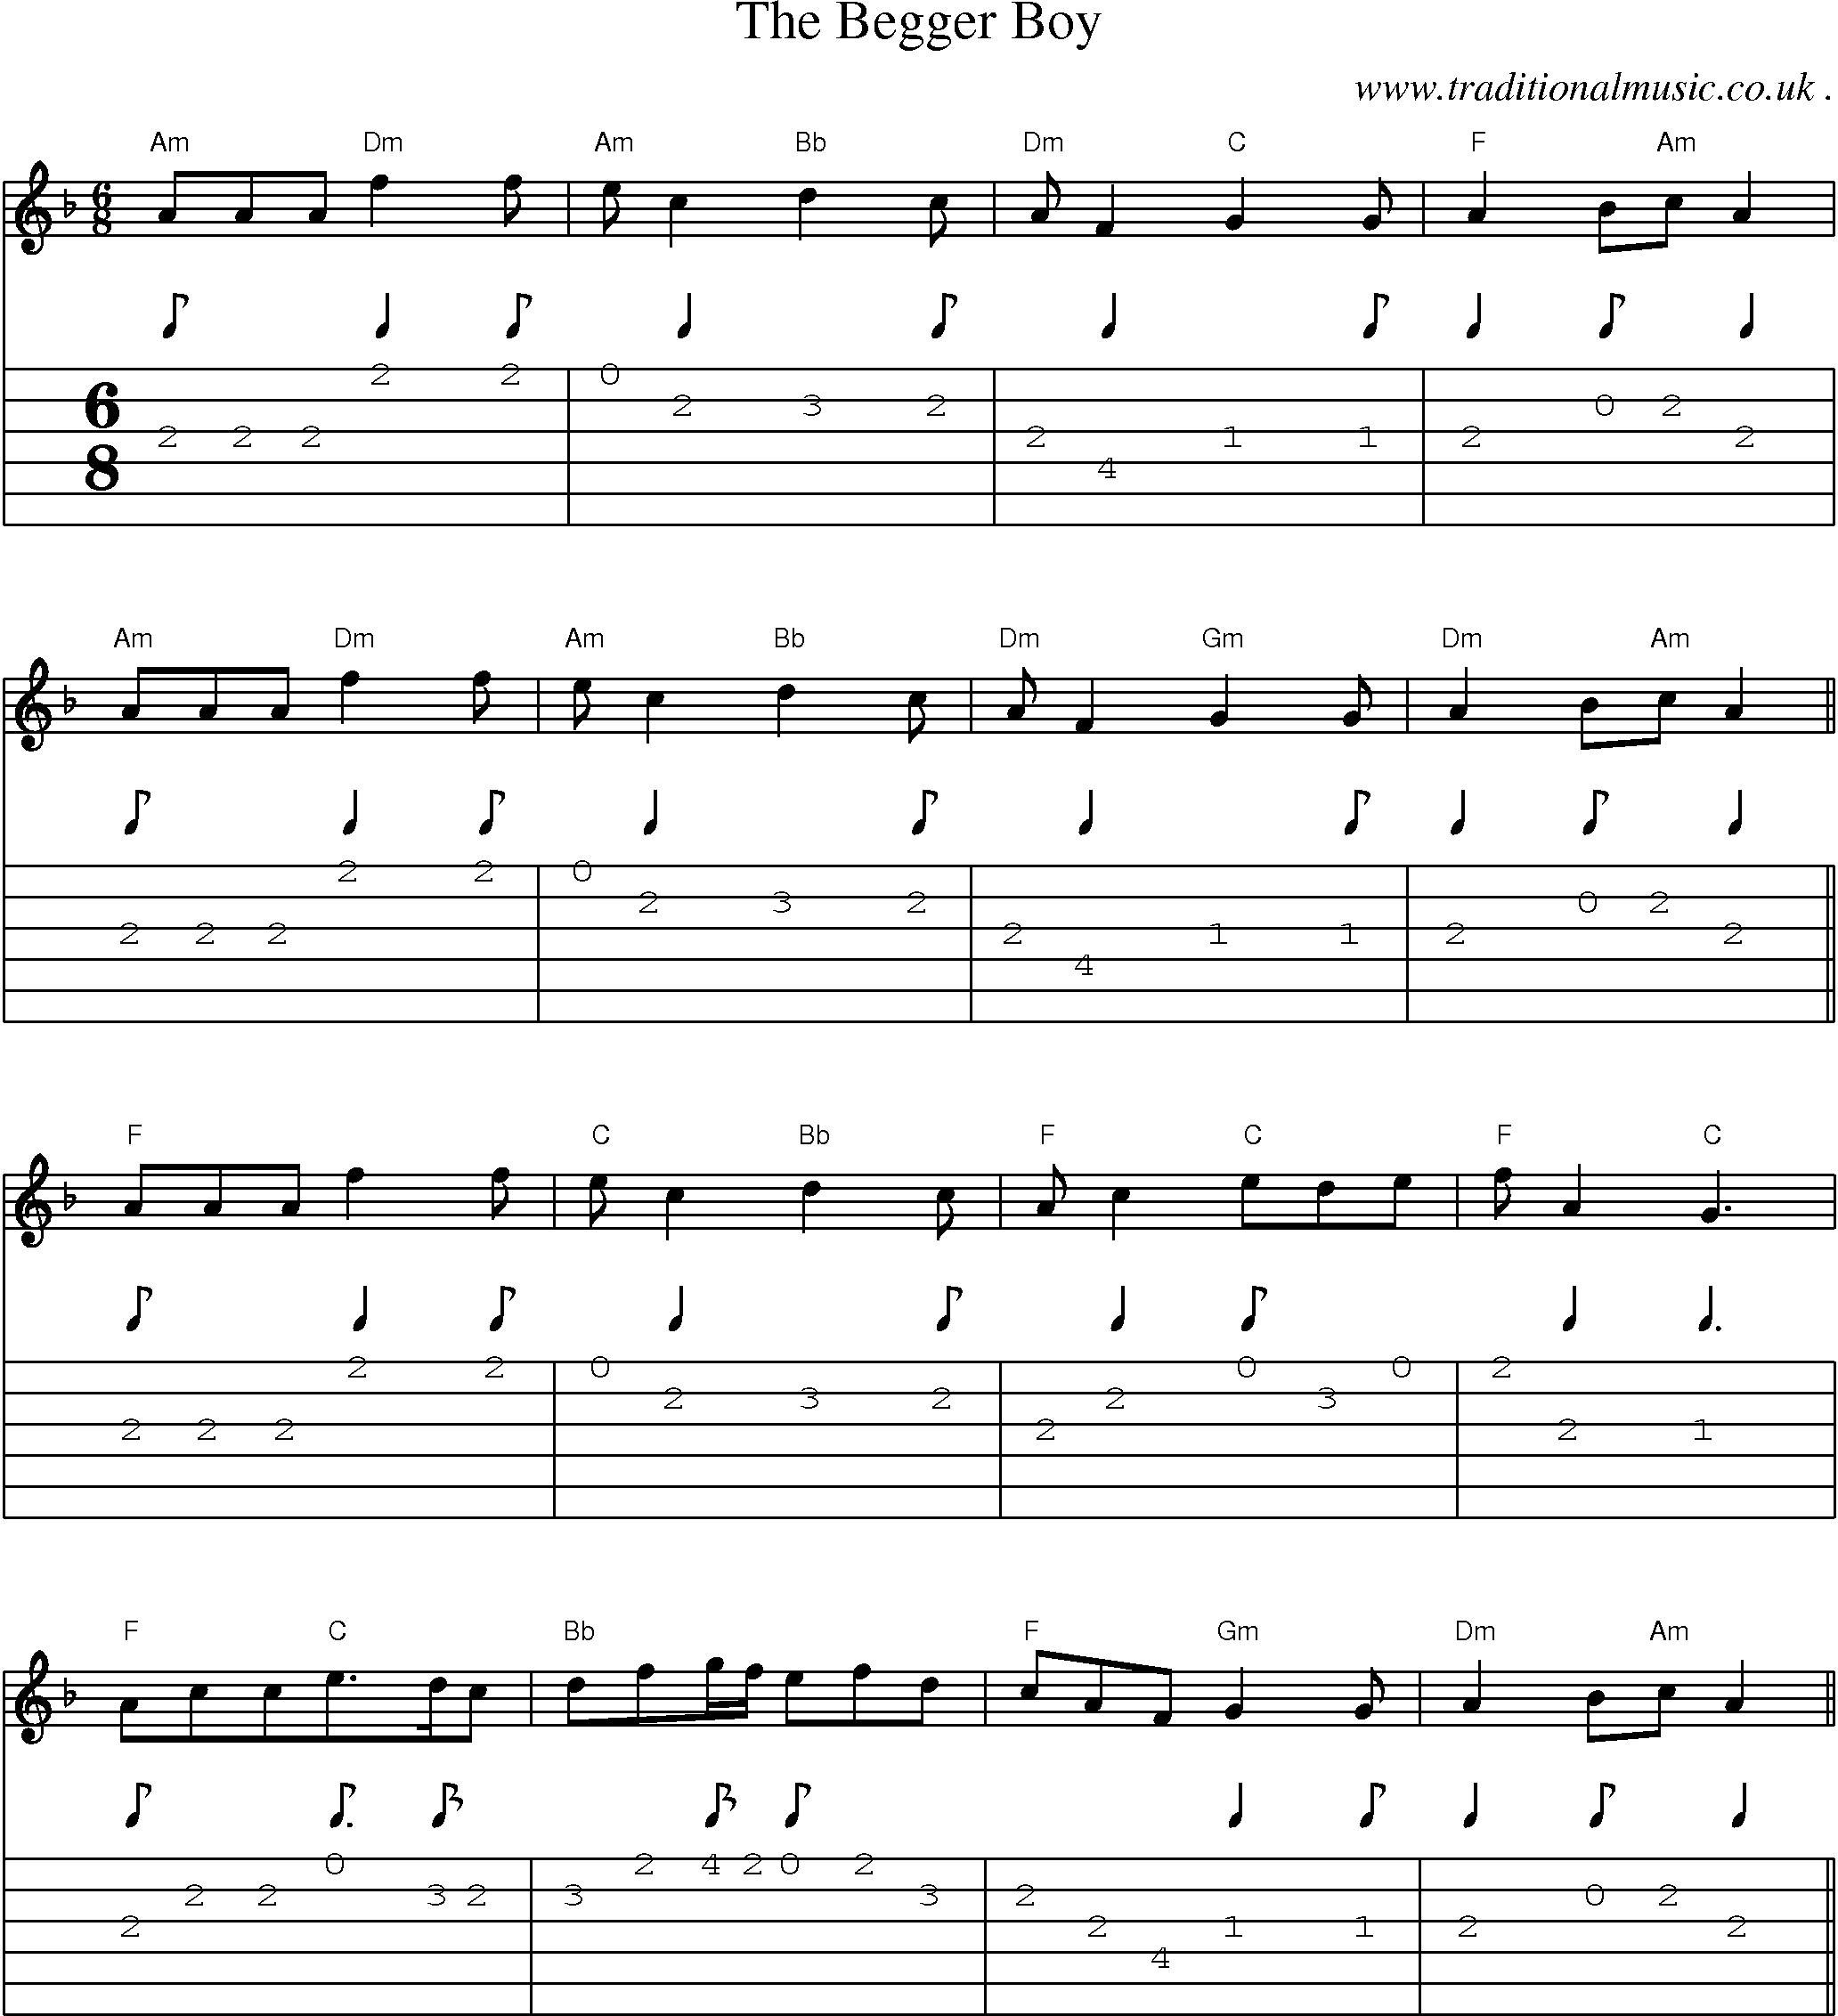 Sheet-Music and Guitar Tabs for The Begger Boy